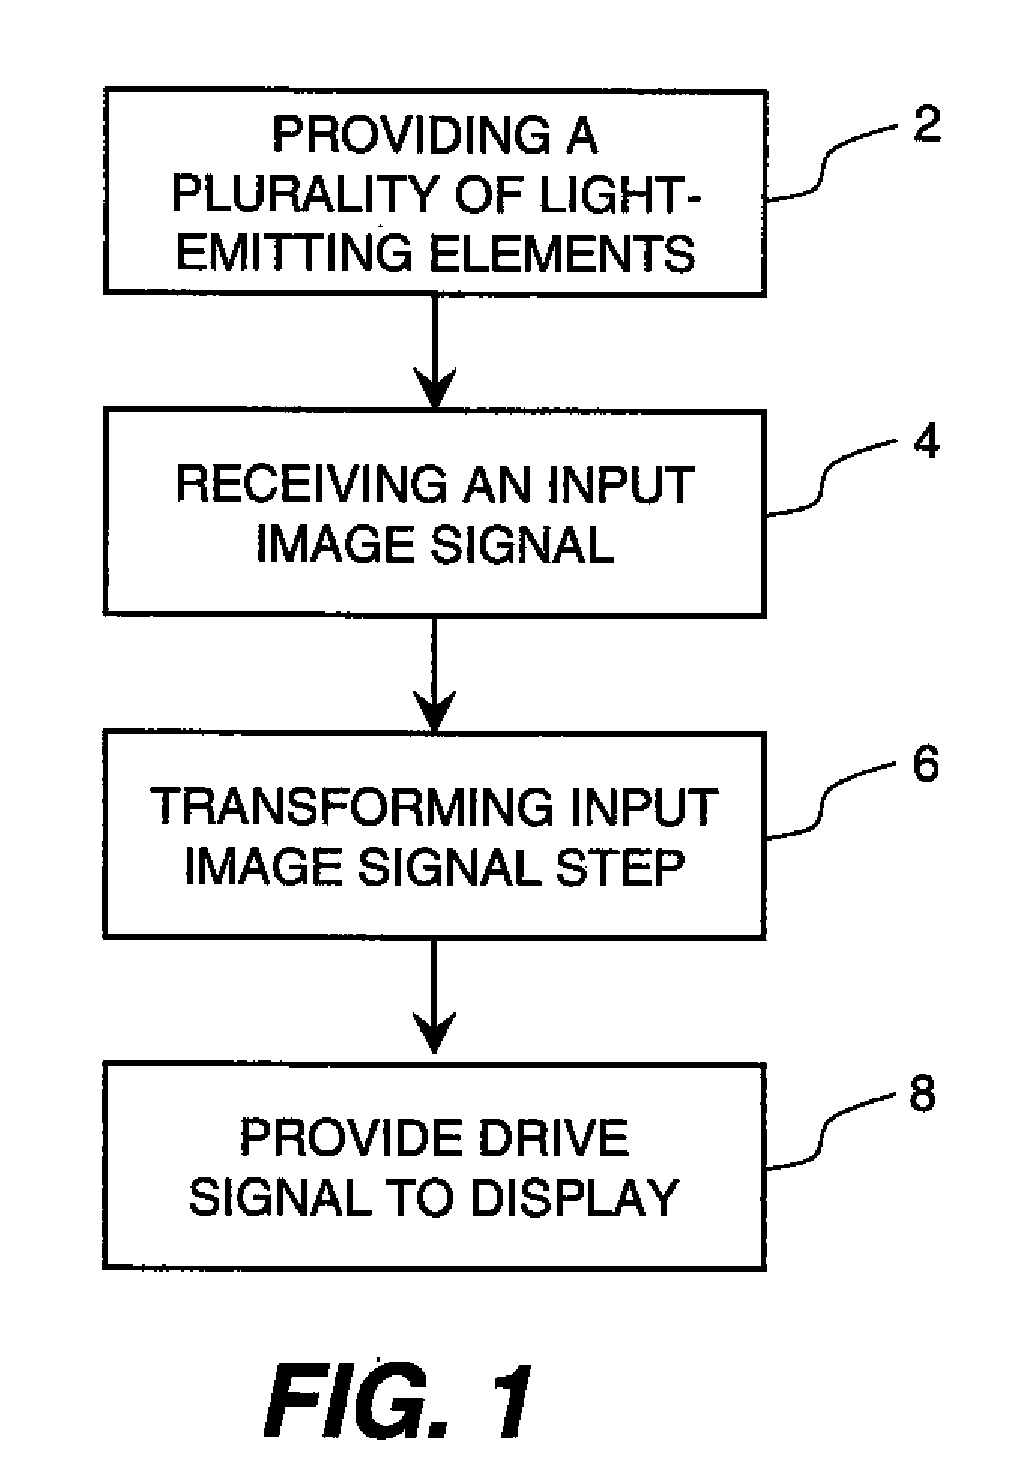 Tonescale compression for electroluminescent display